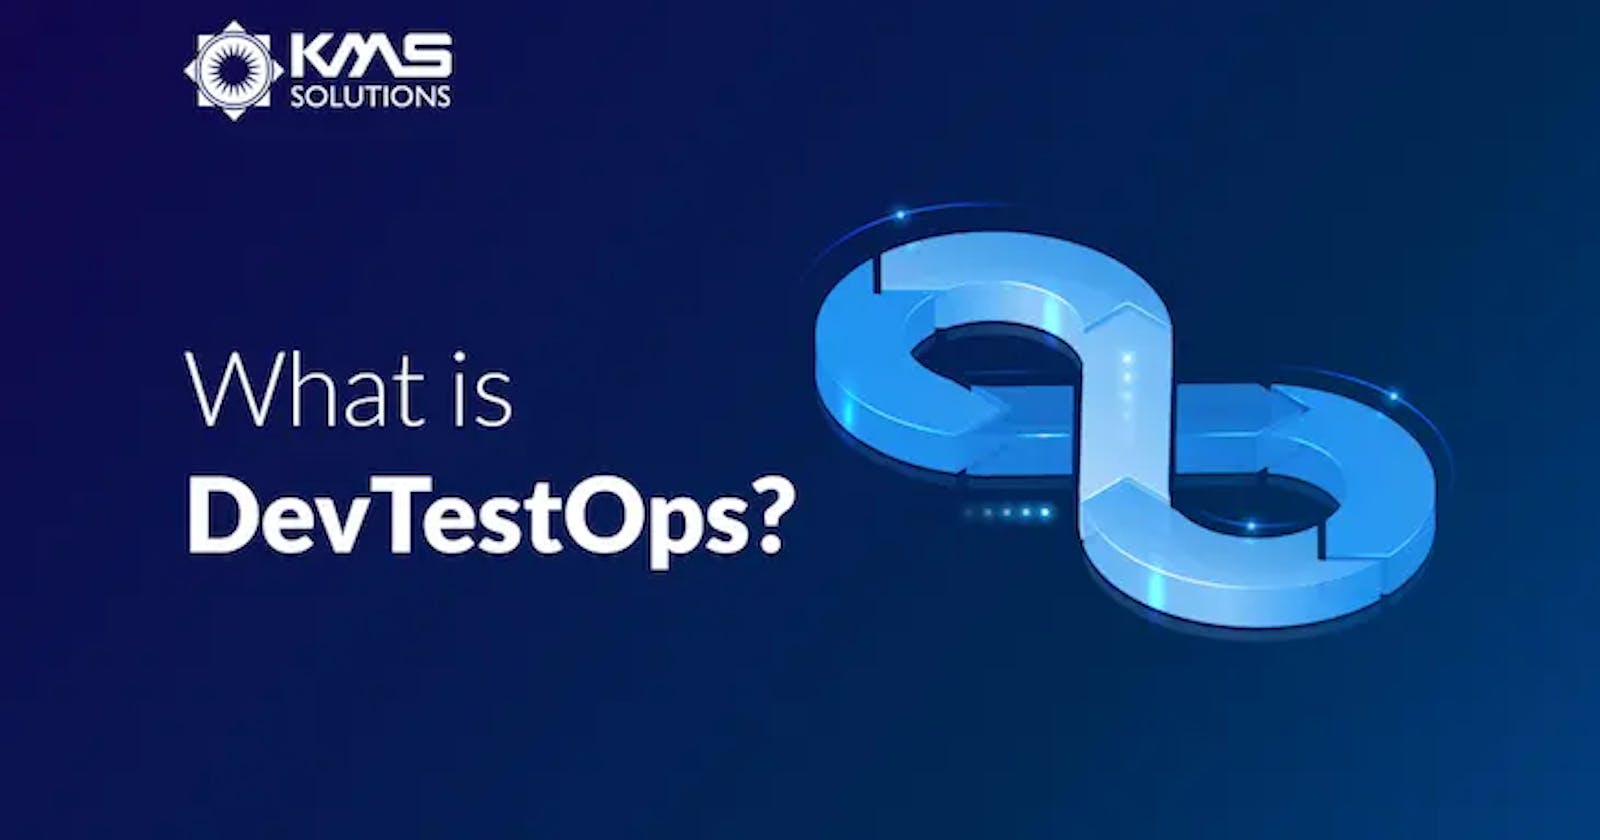 What is DevTestOps and how can it transform Agile?